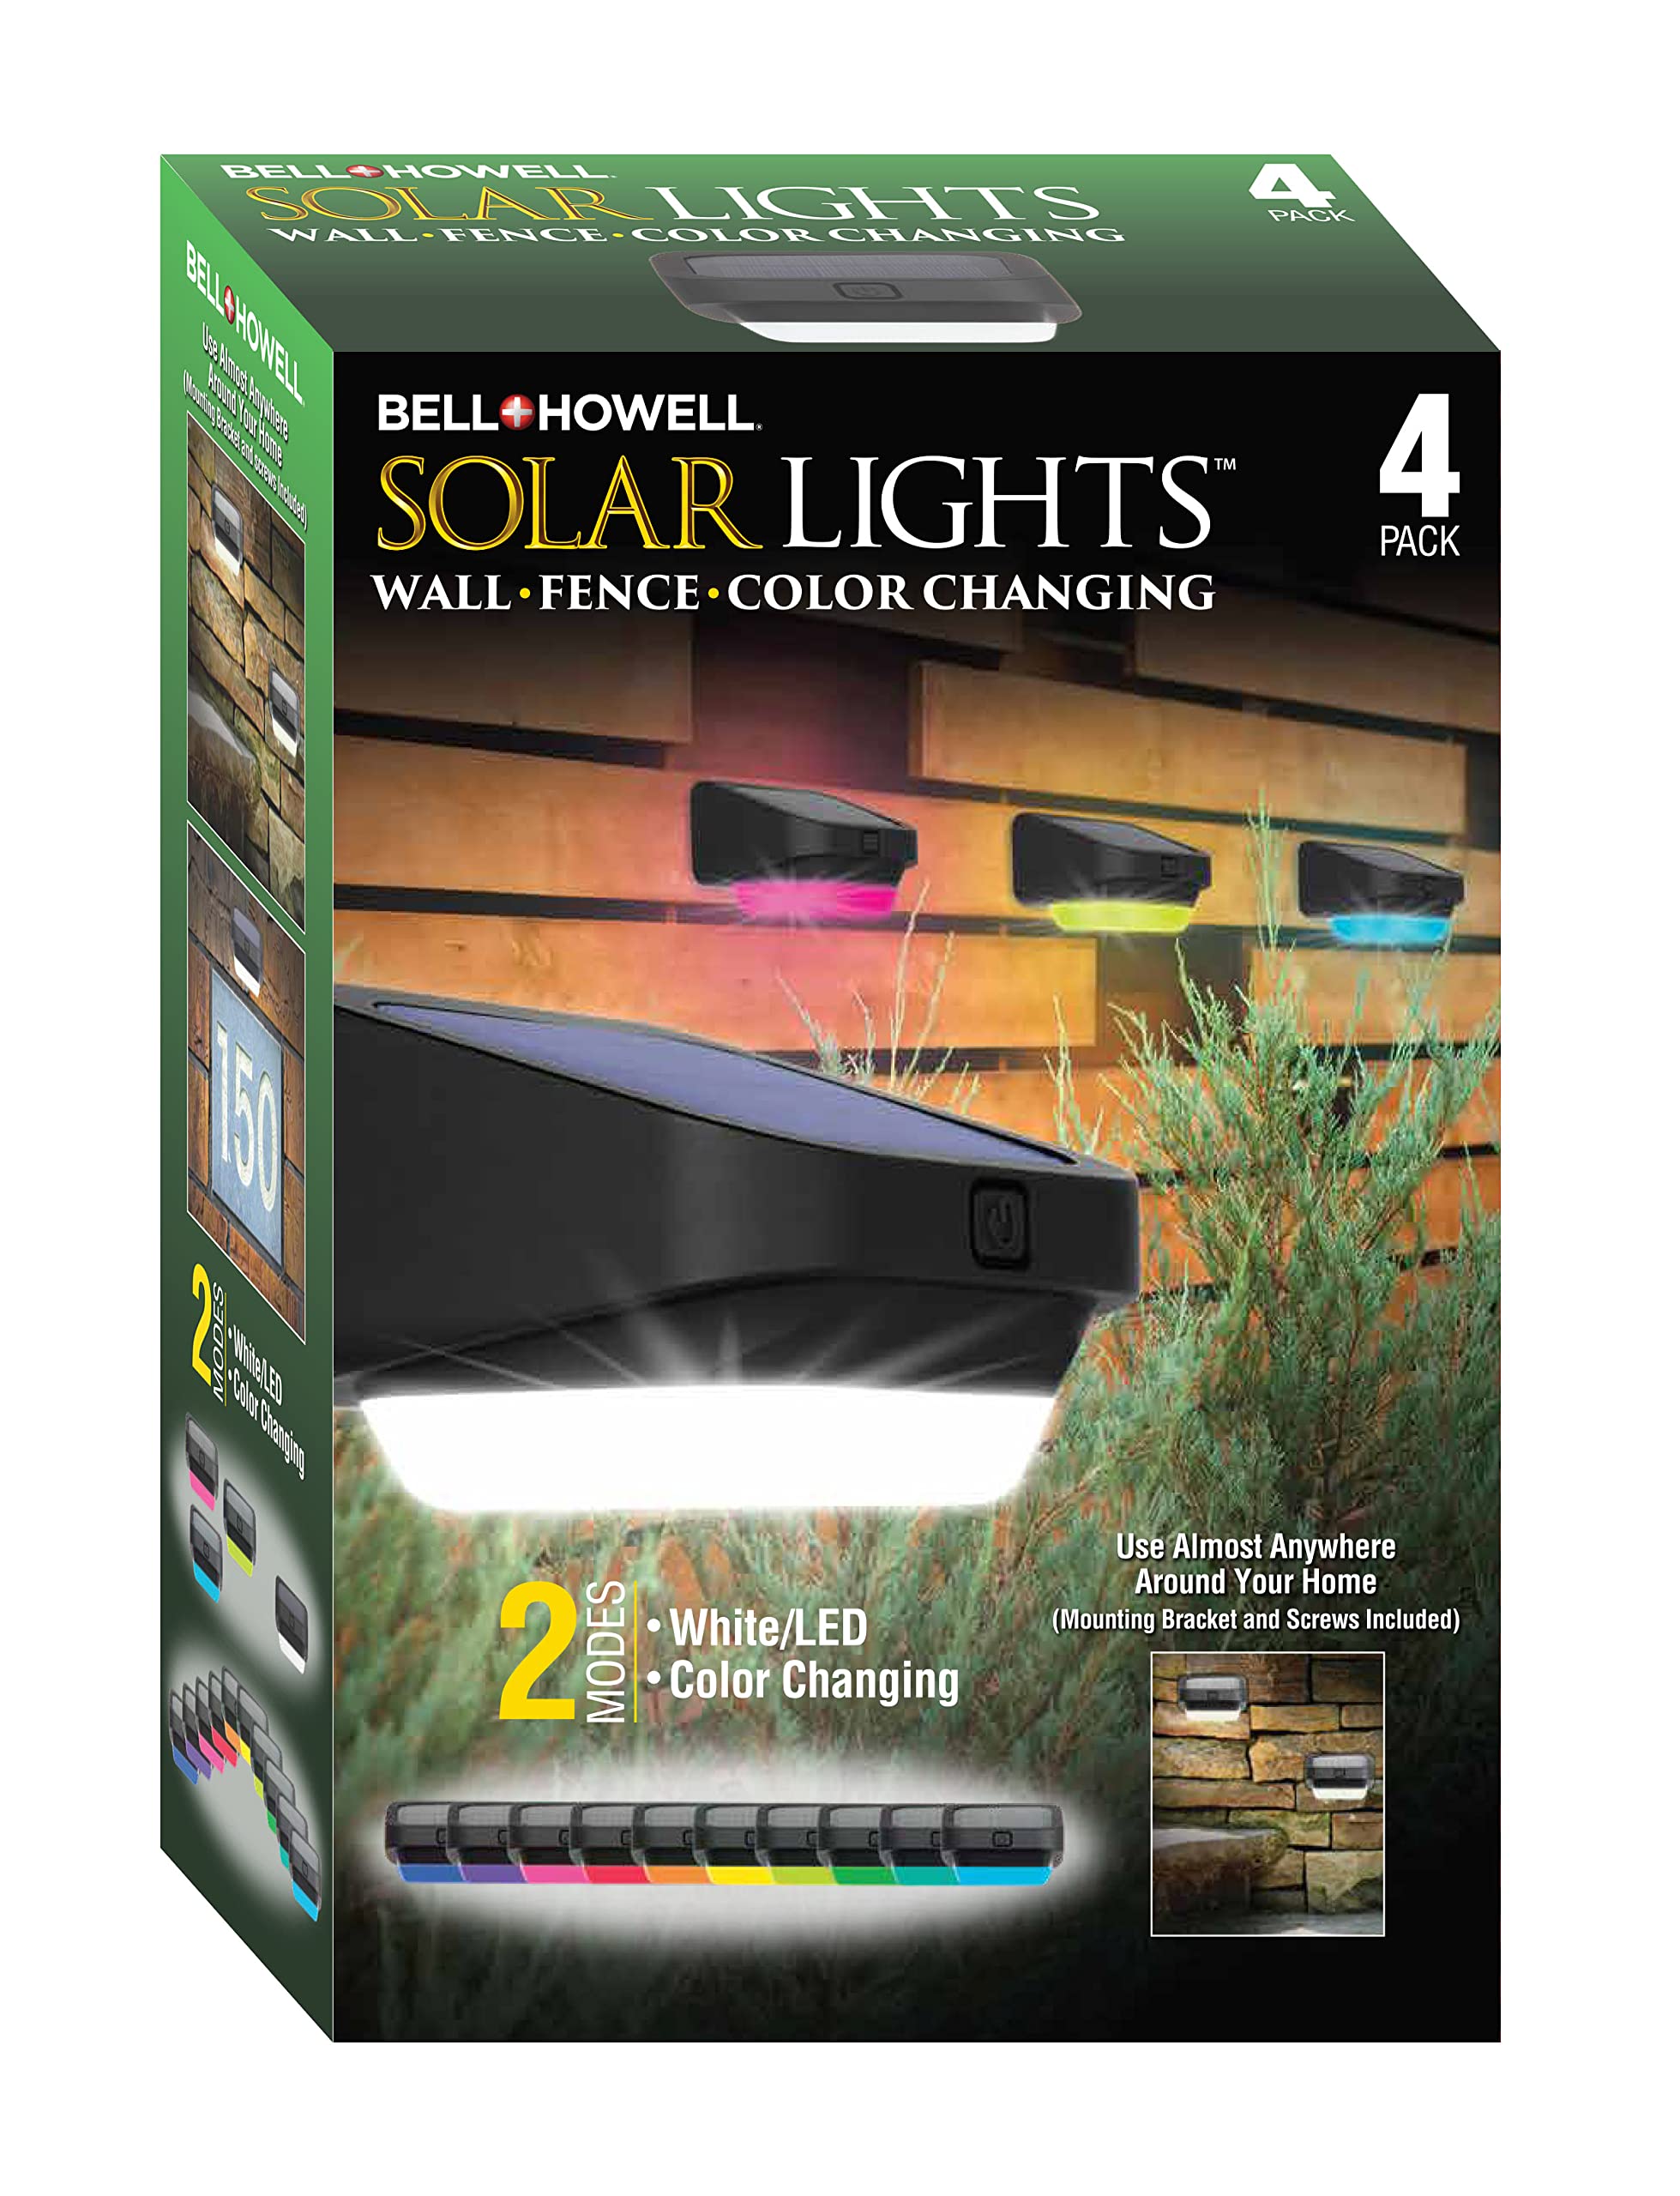 Mua Bell+Howell Solar Deck Fence Lights Outdoor Step Light Waterproof Solar  Fence Lights for Patio, Stairs, Pathway, Porch, Driveway, Yard or Garden  Decor, White/LED Color Glow Lighting Packs trên Amazon